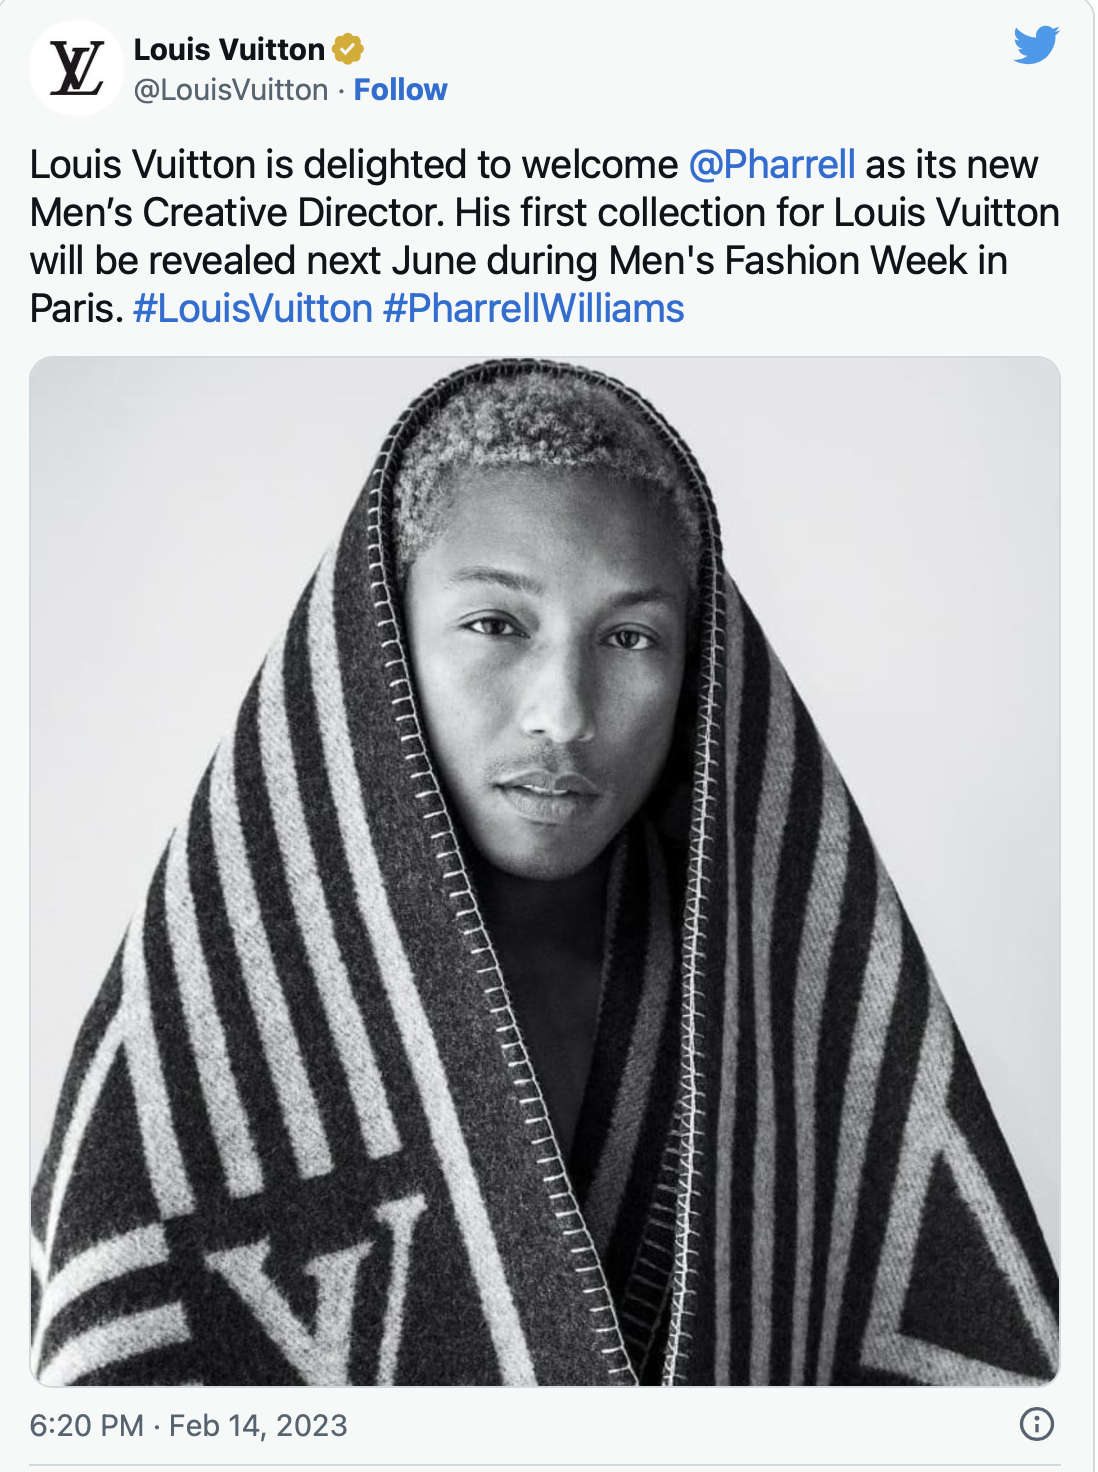 Pharrell Williams Is Officially Louis Vuitton's Men's Creative Director -  The Influential